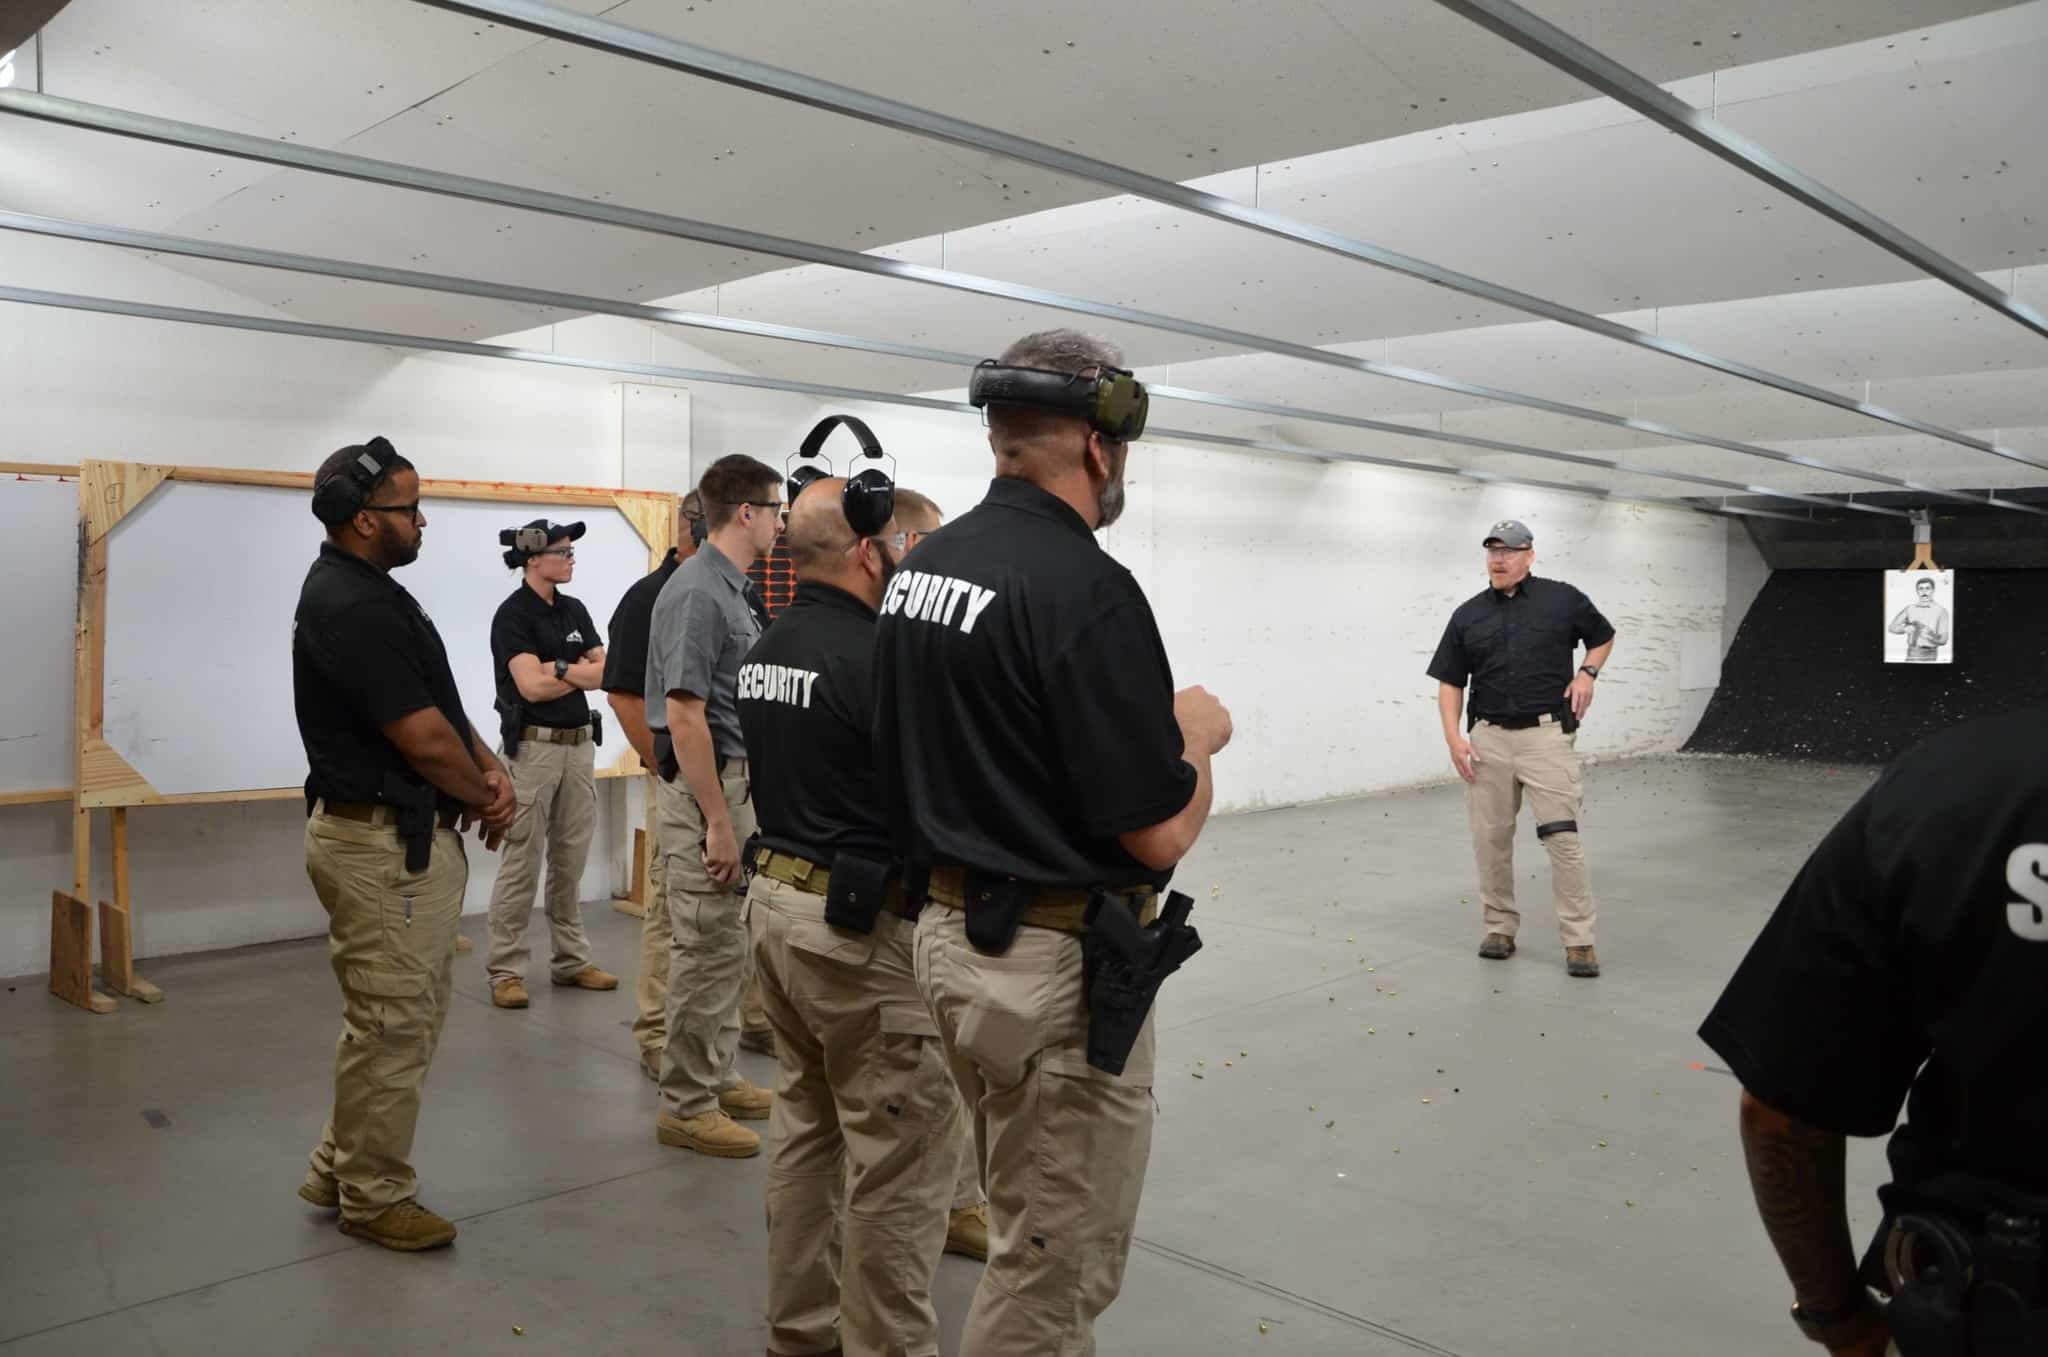 security guards at a training facility receiving instruction